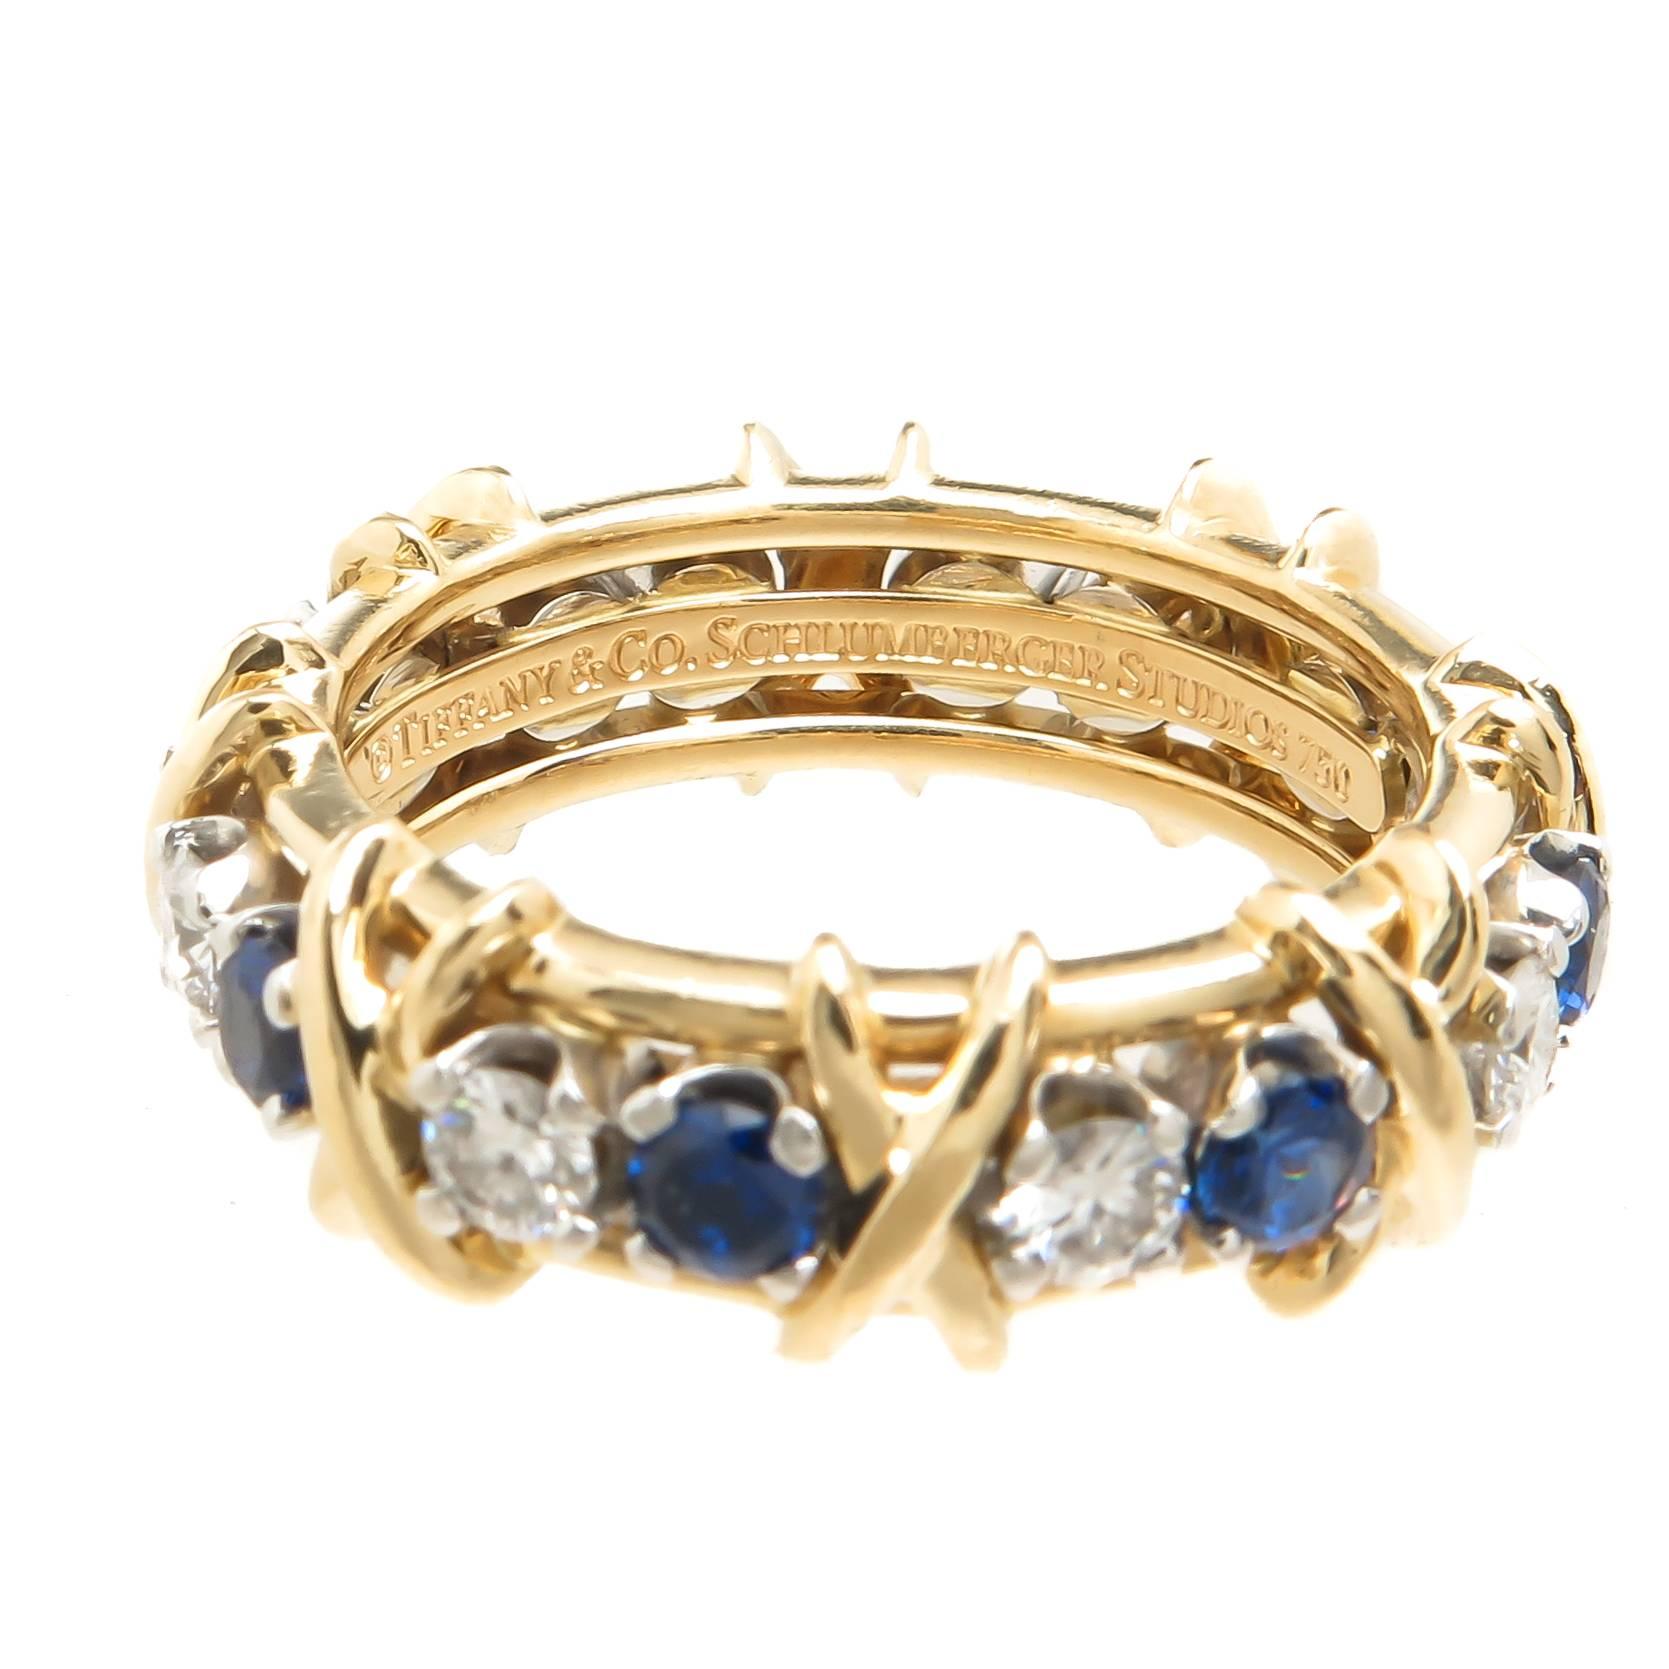 Circa 2005 Jean Schlumberger for Tiffany & Company X Band Ring, 18K Yellow Gold and set with 8 Round Brilliant cut Diamonds Grading as G in color and VS in Clarity and 8 Fine Color sapphires. Measuring 5 MM wide and a finger size 6 1/2.